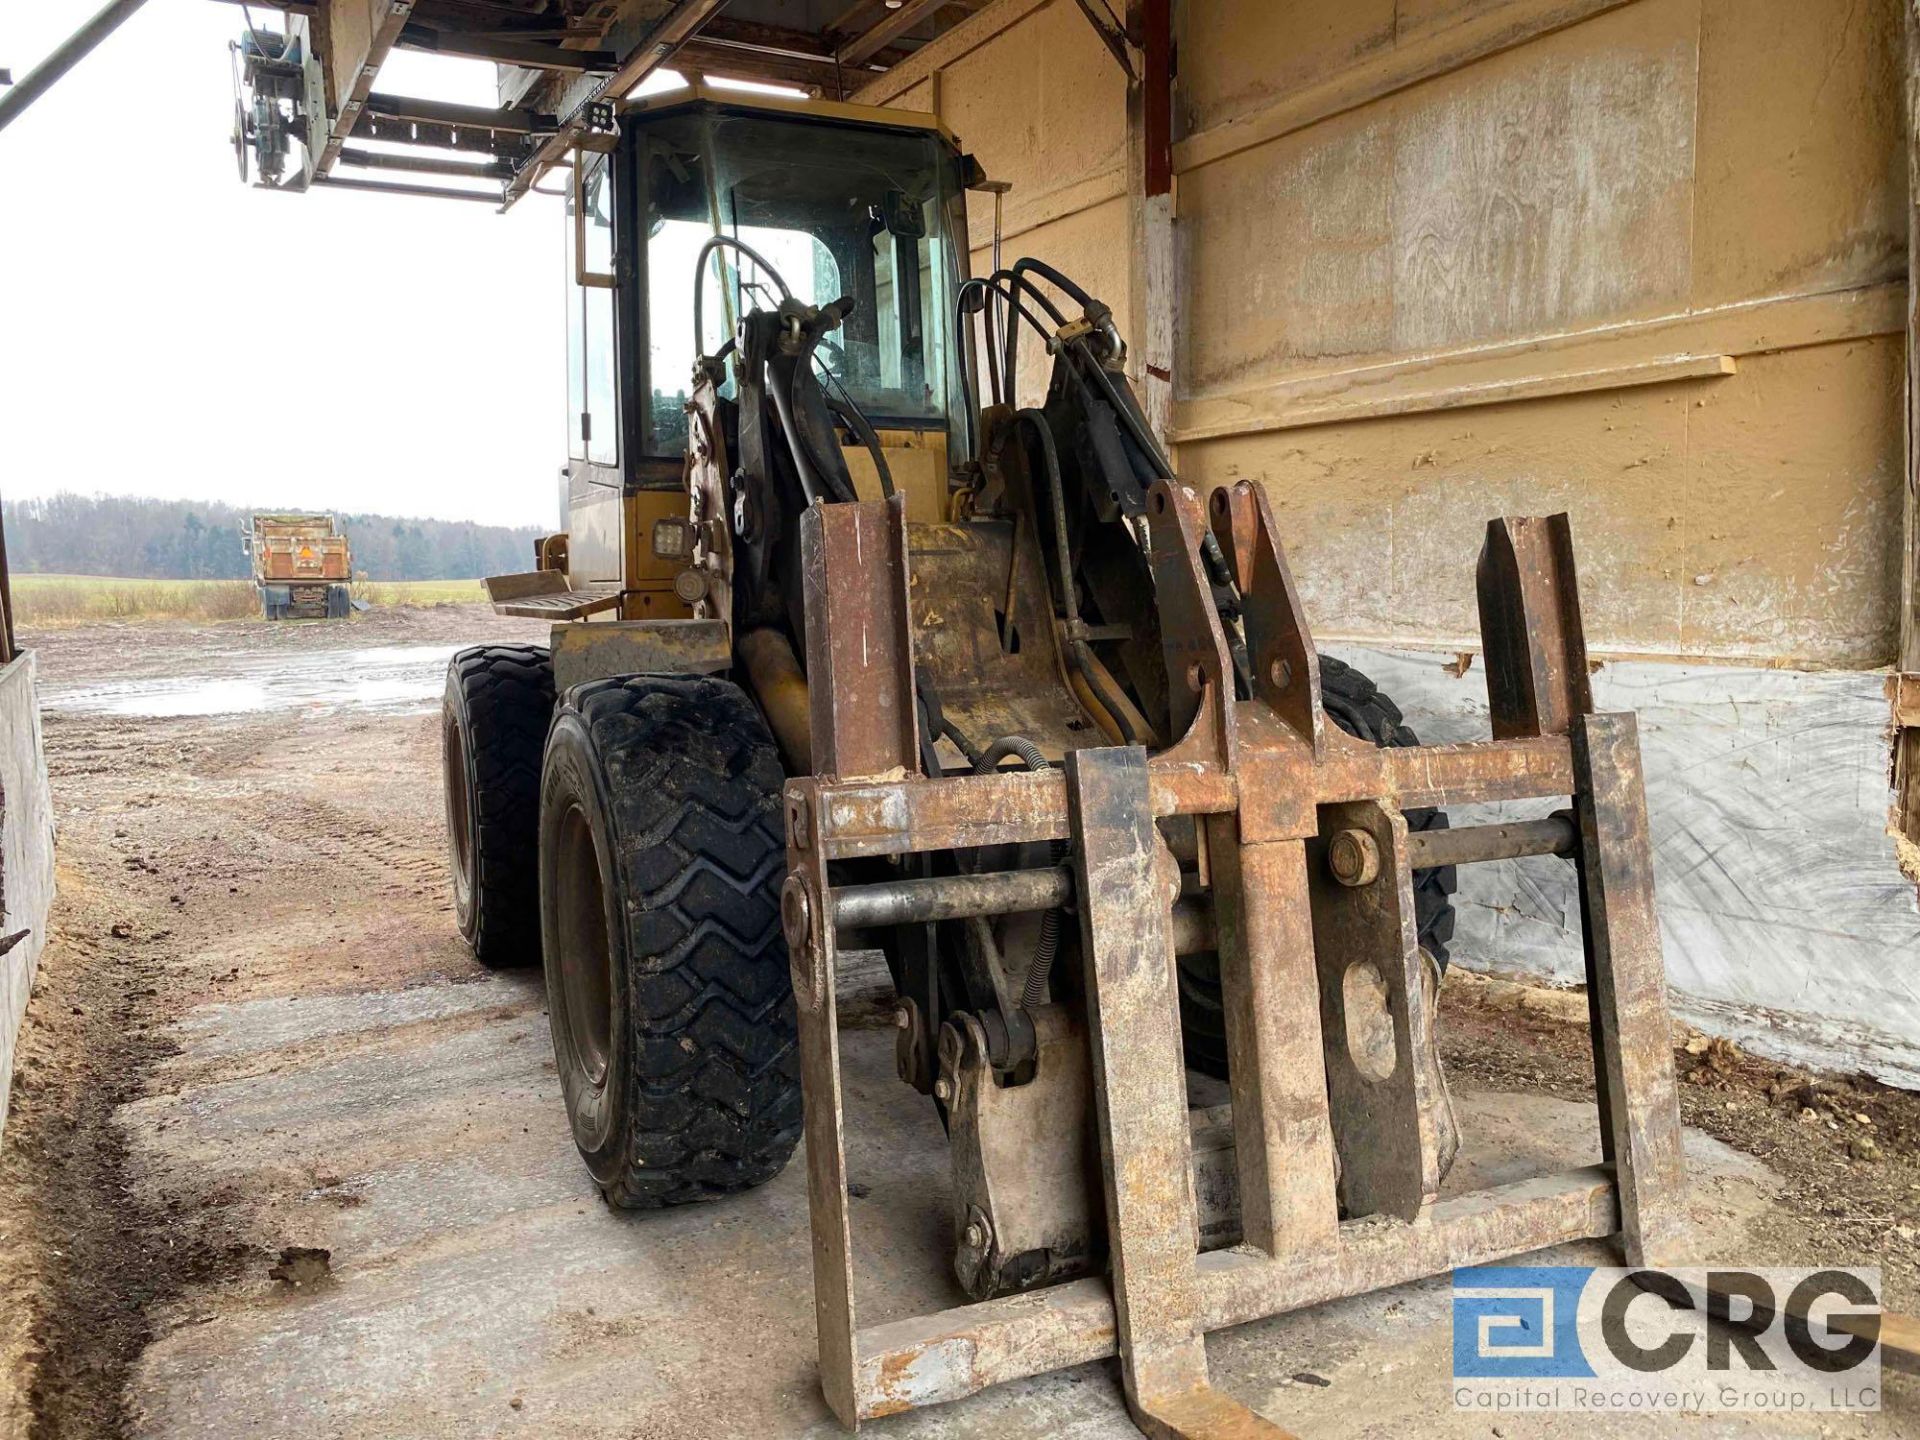 CAT IT24F wheel loader, SN 4NN00590, 19,636 hours, (Ames Number 004940); with 4ft forklift